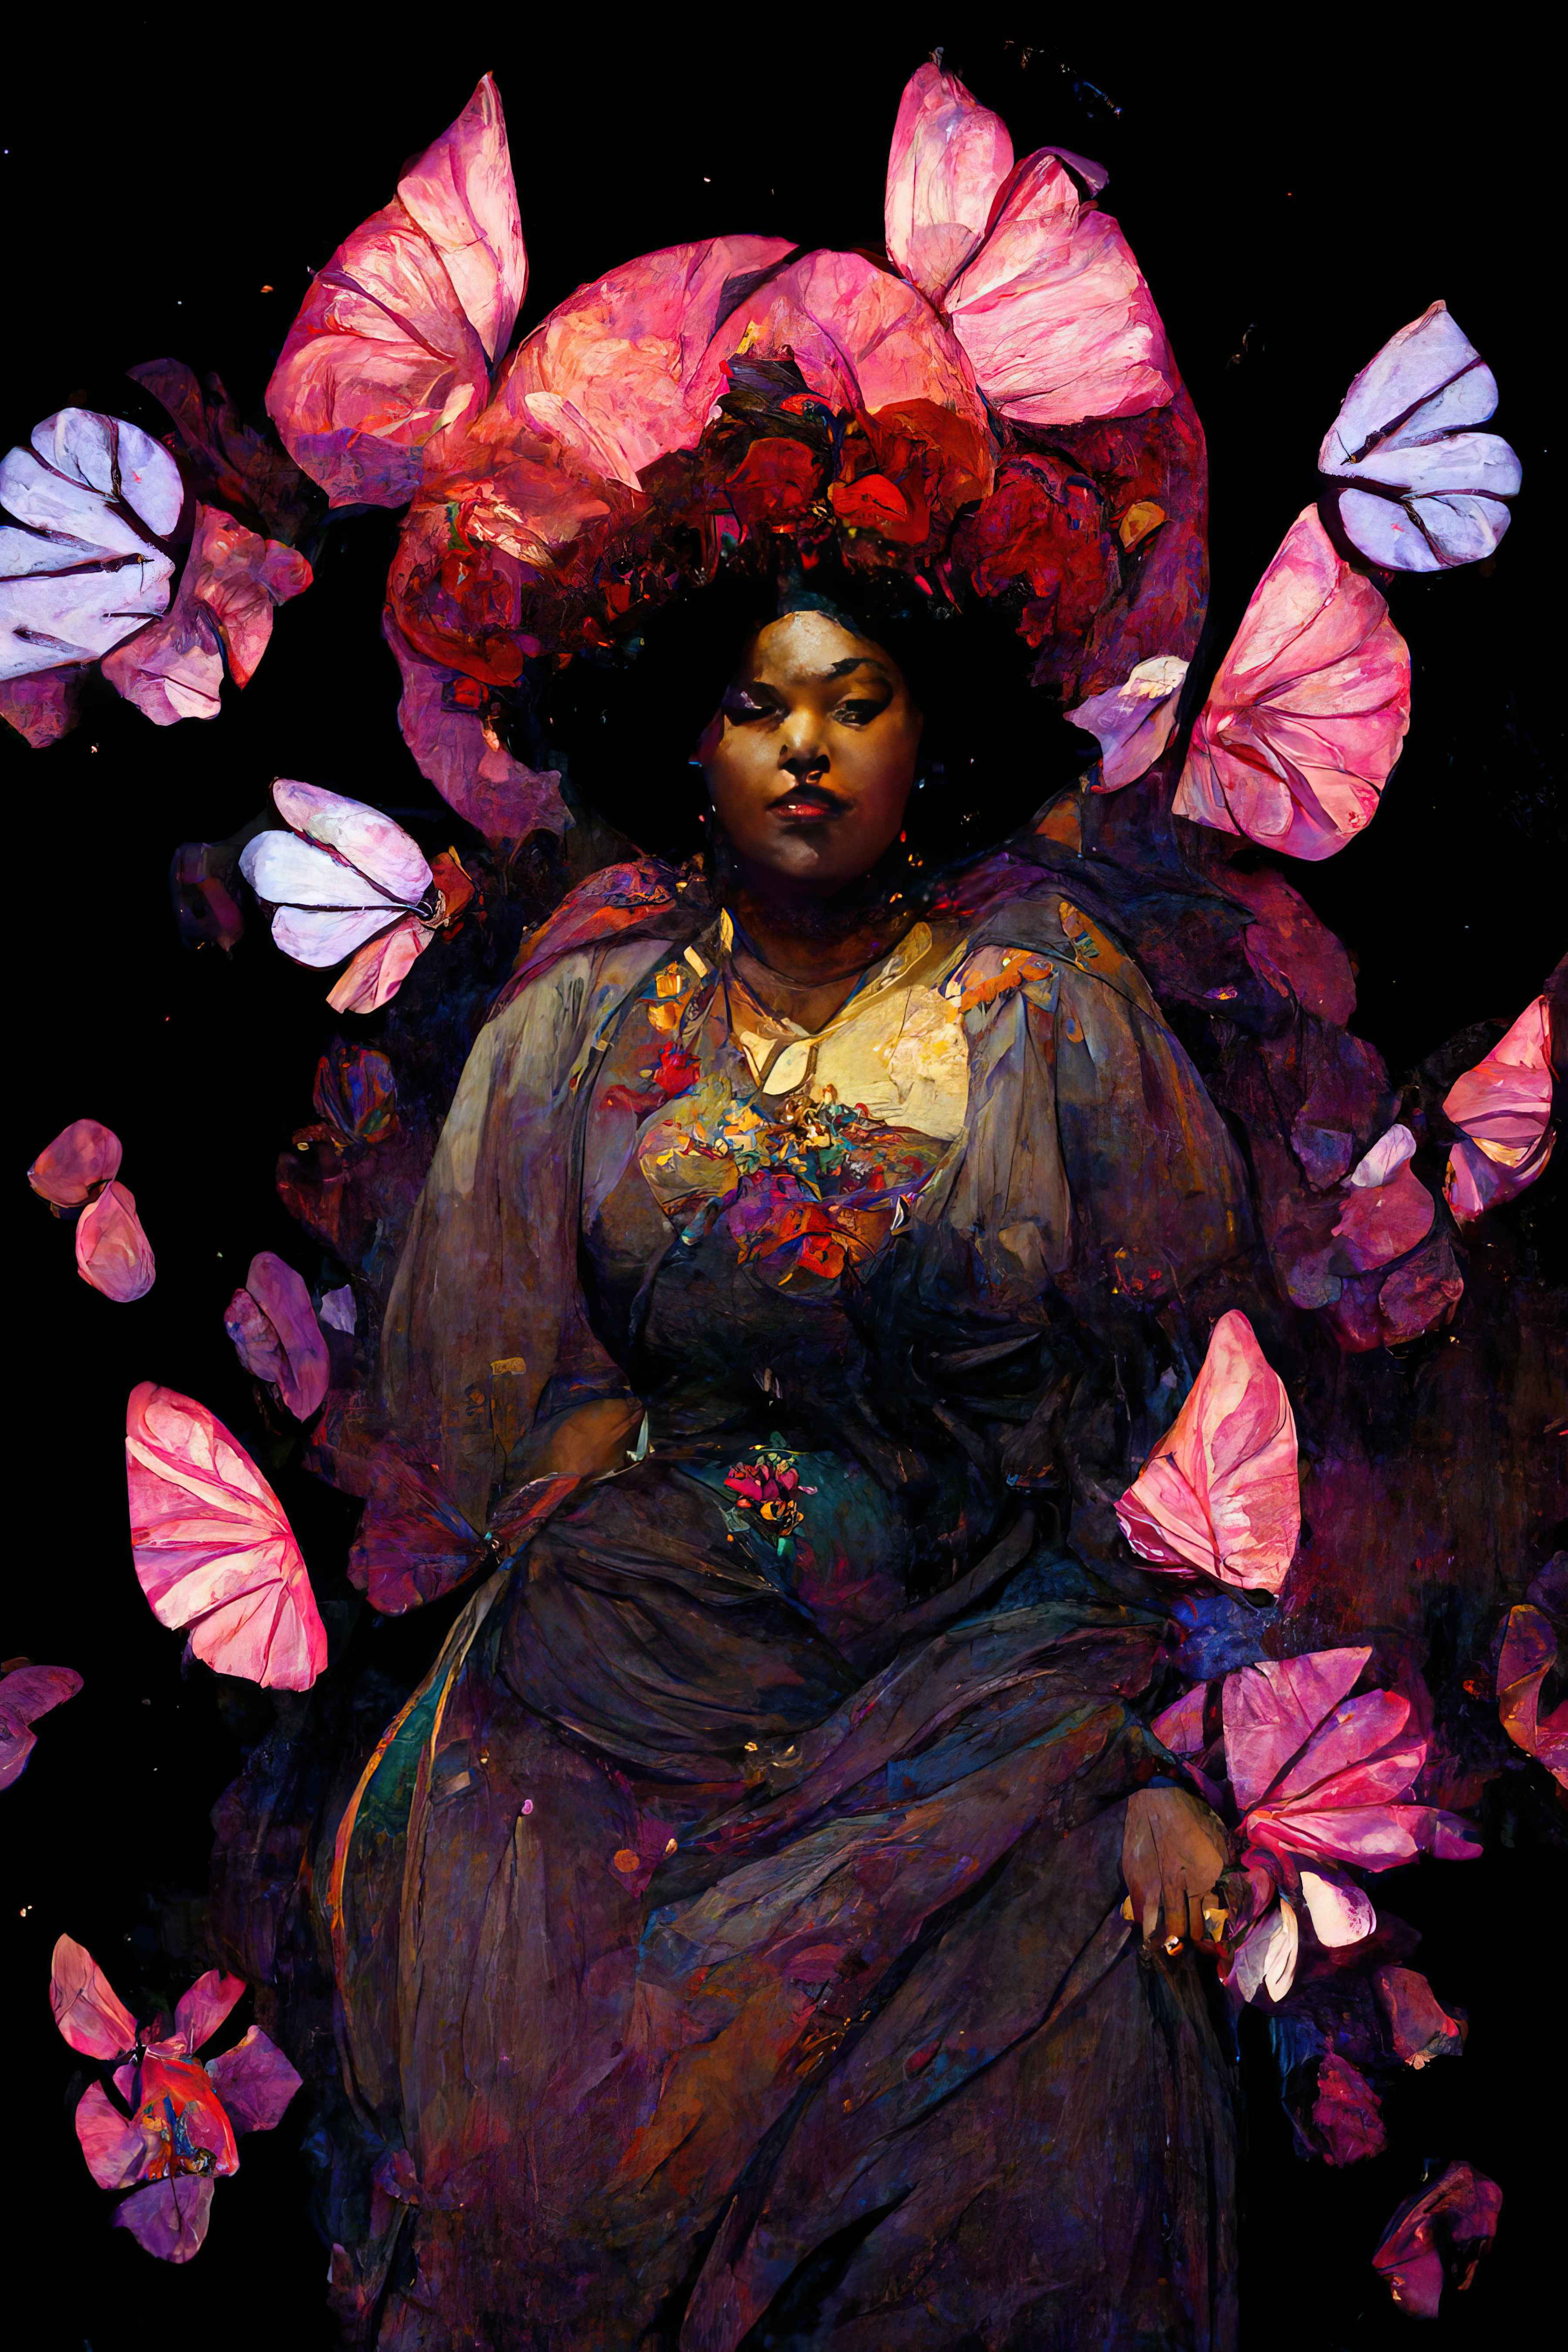 A painterly illustration of a black woman. Her eyes are closed while magenta butterflies float around her on a dark background. She wears a crown of roses. The woman's hands are at her sides. She is wearing an elegant and formal flowing dress with specs of color throughout. She looks proud. 